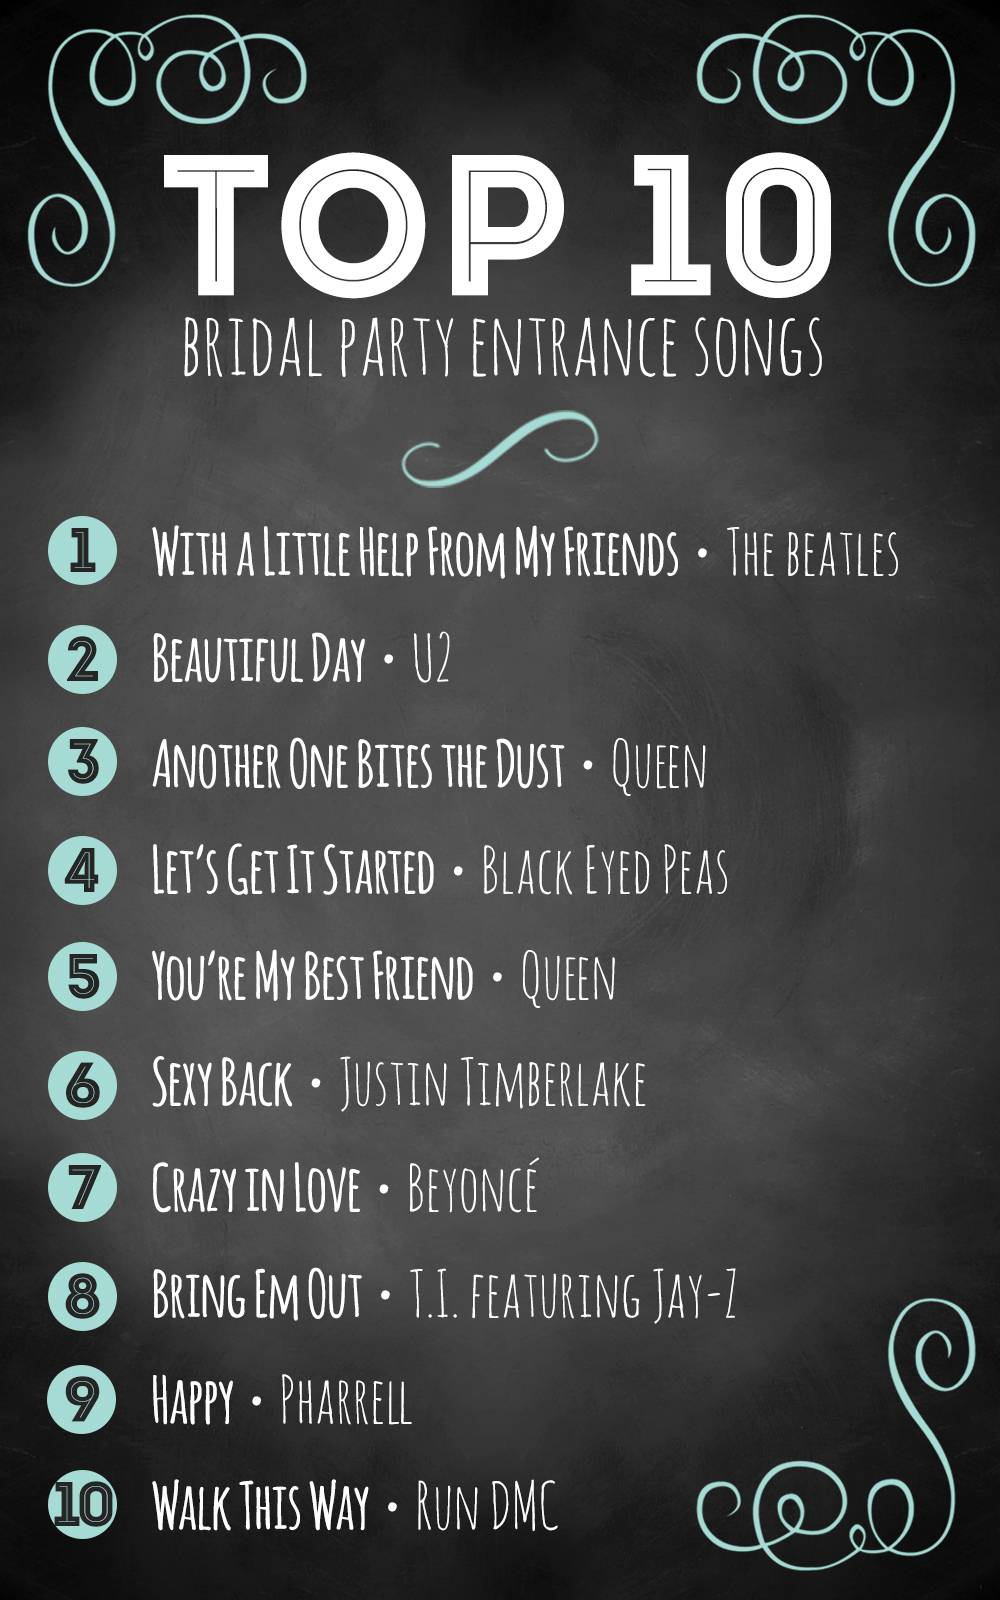 Top 10 Bridal Party Entrance Songs